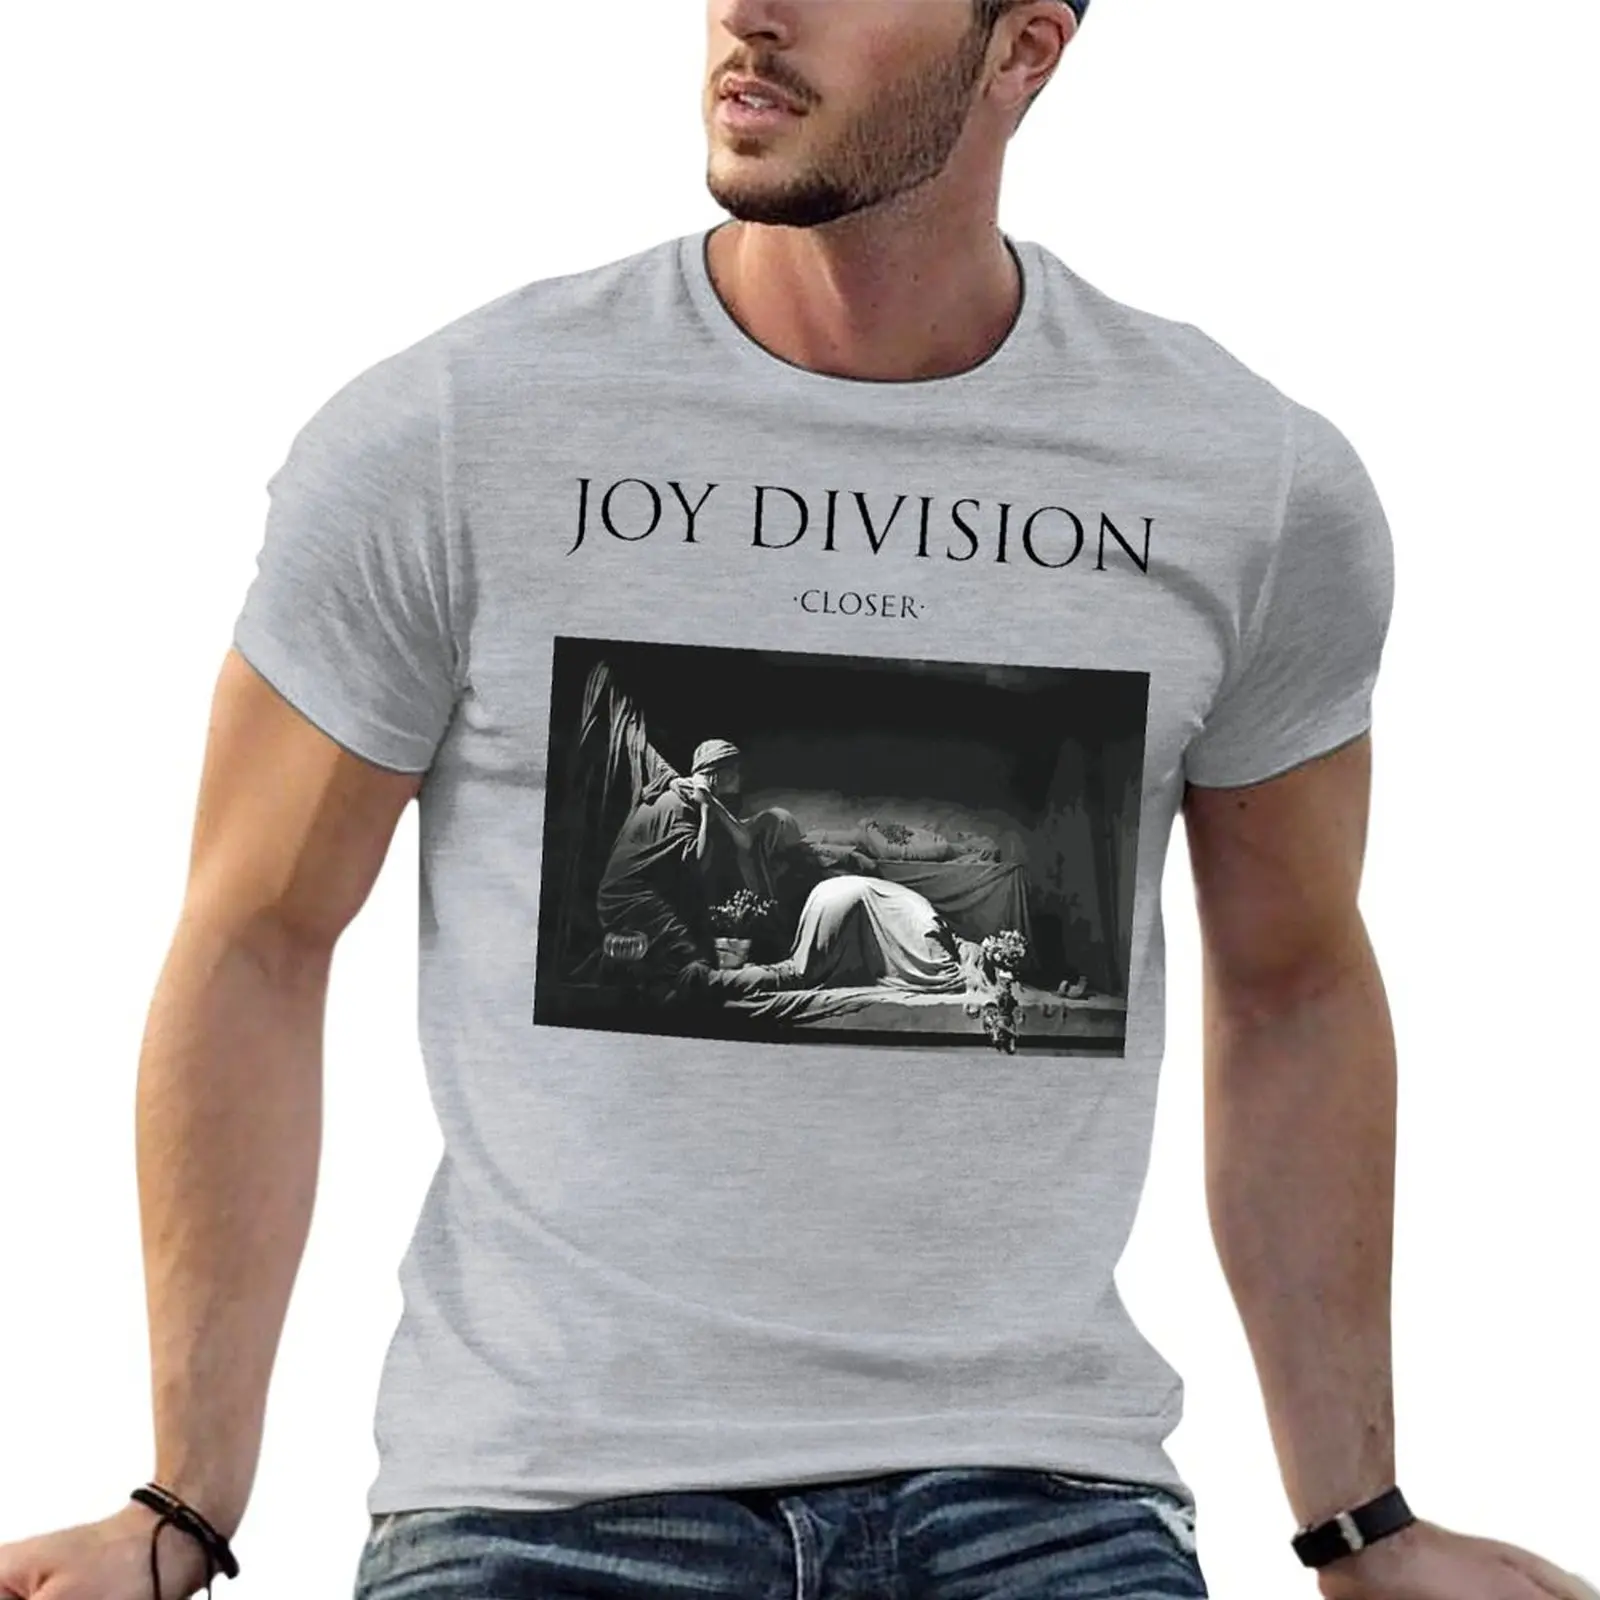 

Joy Division - The Cure Siouxsie And The Banshees Oversized T Shirts Funny Mens Clothes 100% Cotton Streetwear Big Size Tops Tee